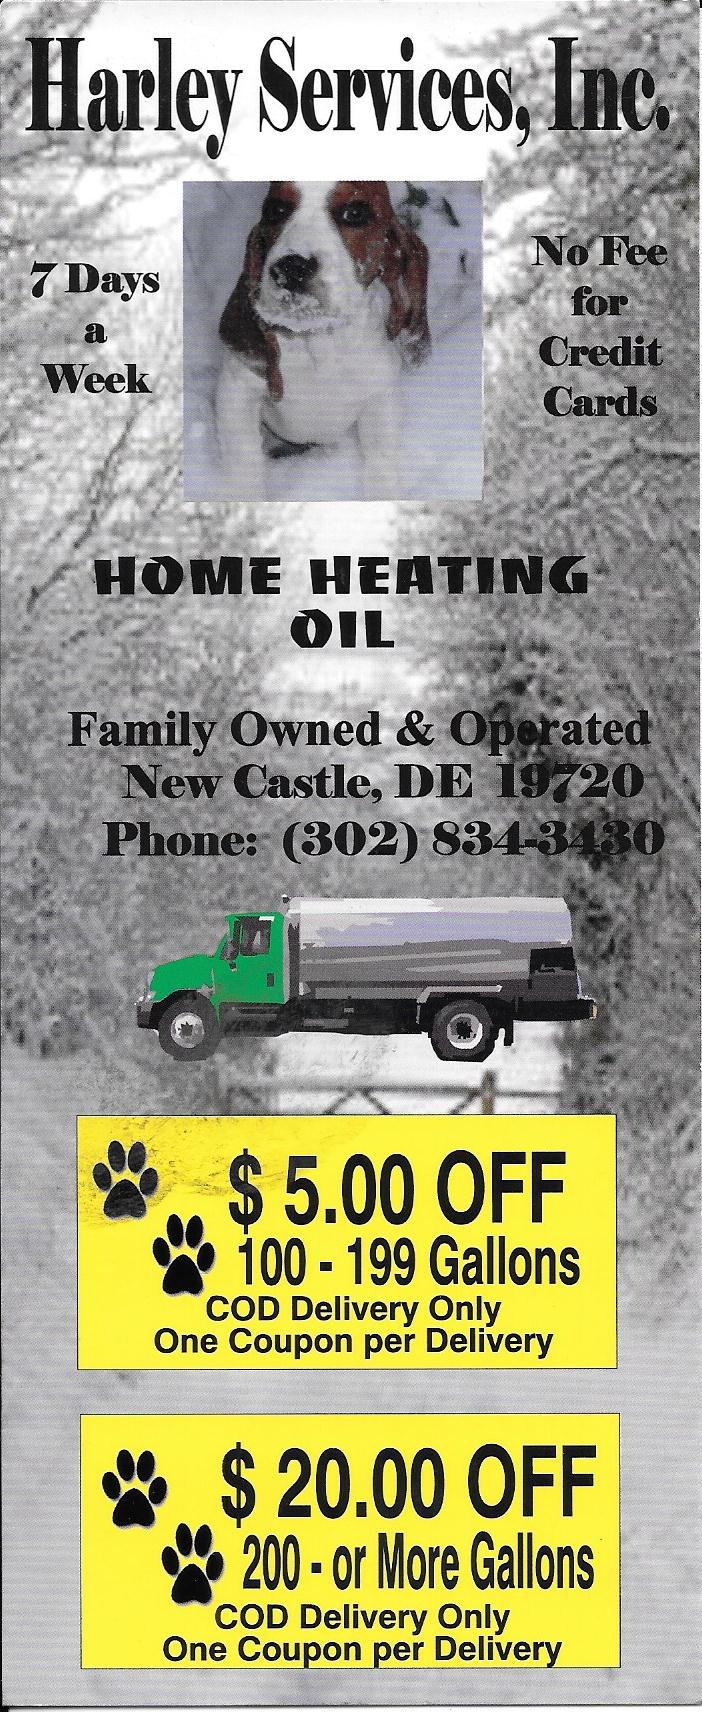 Harley Services, Inc. Heating Oil